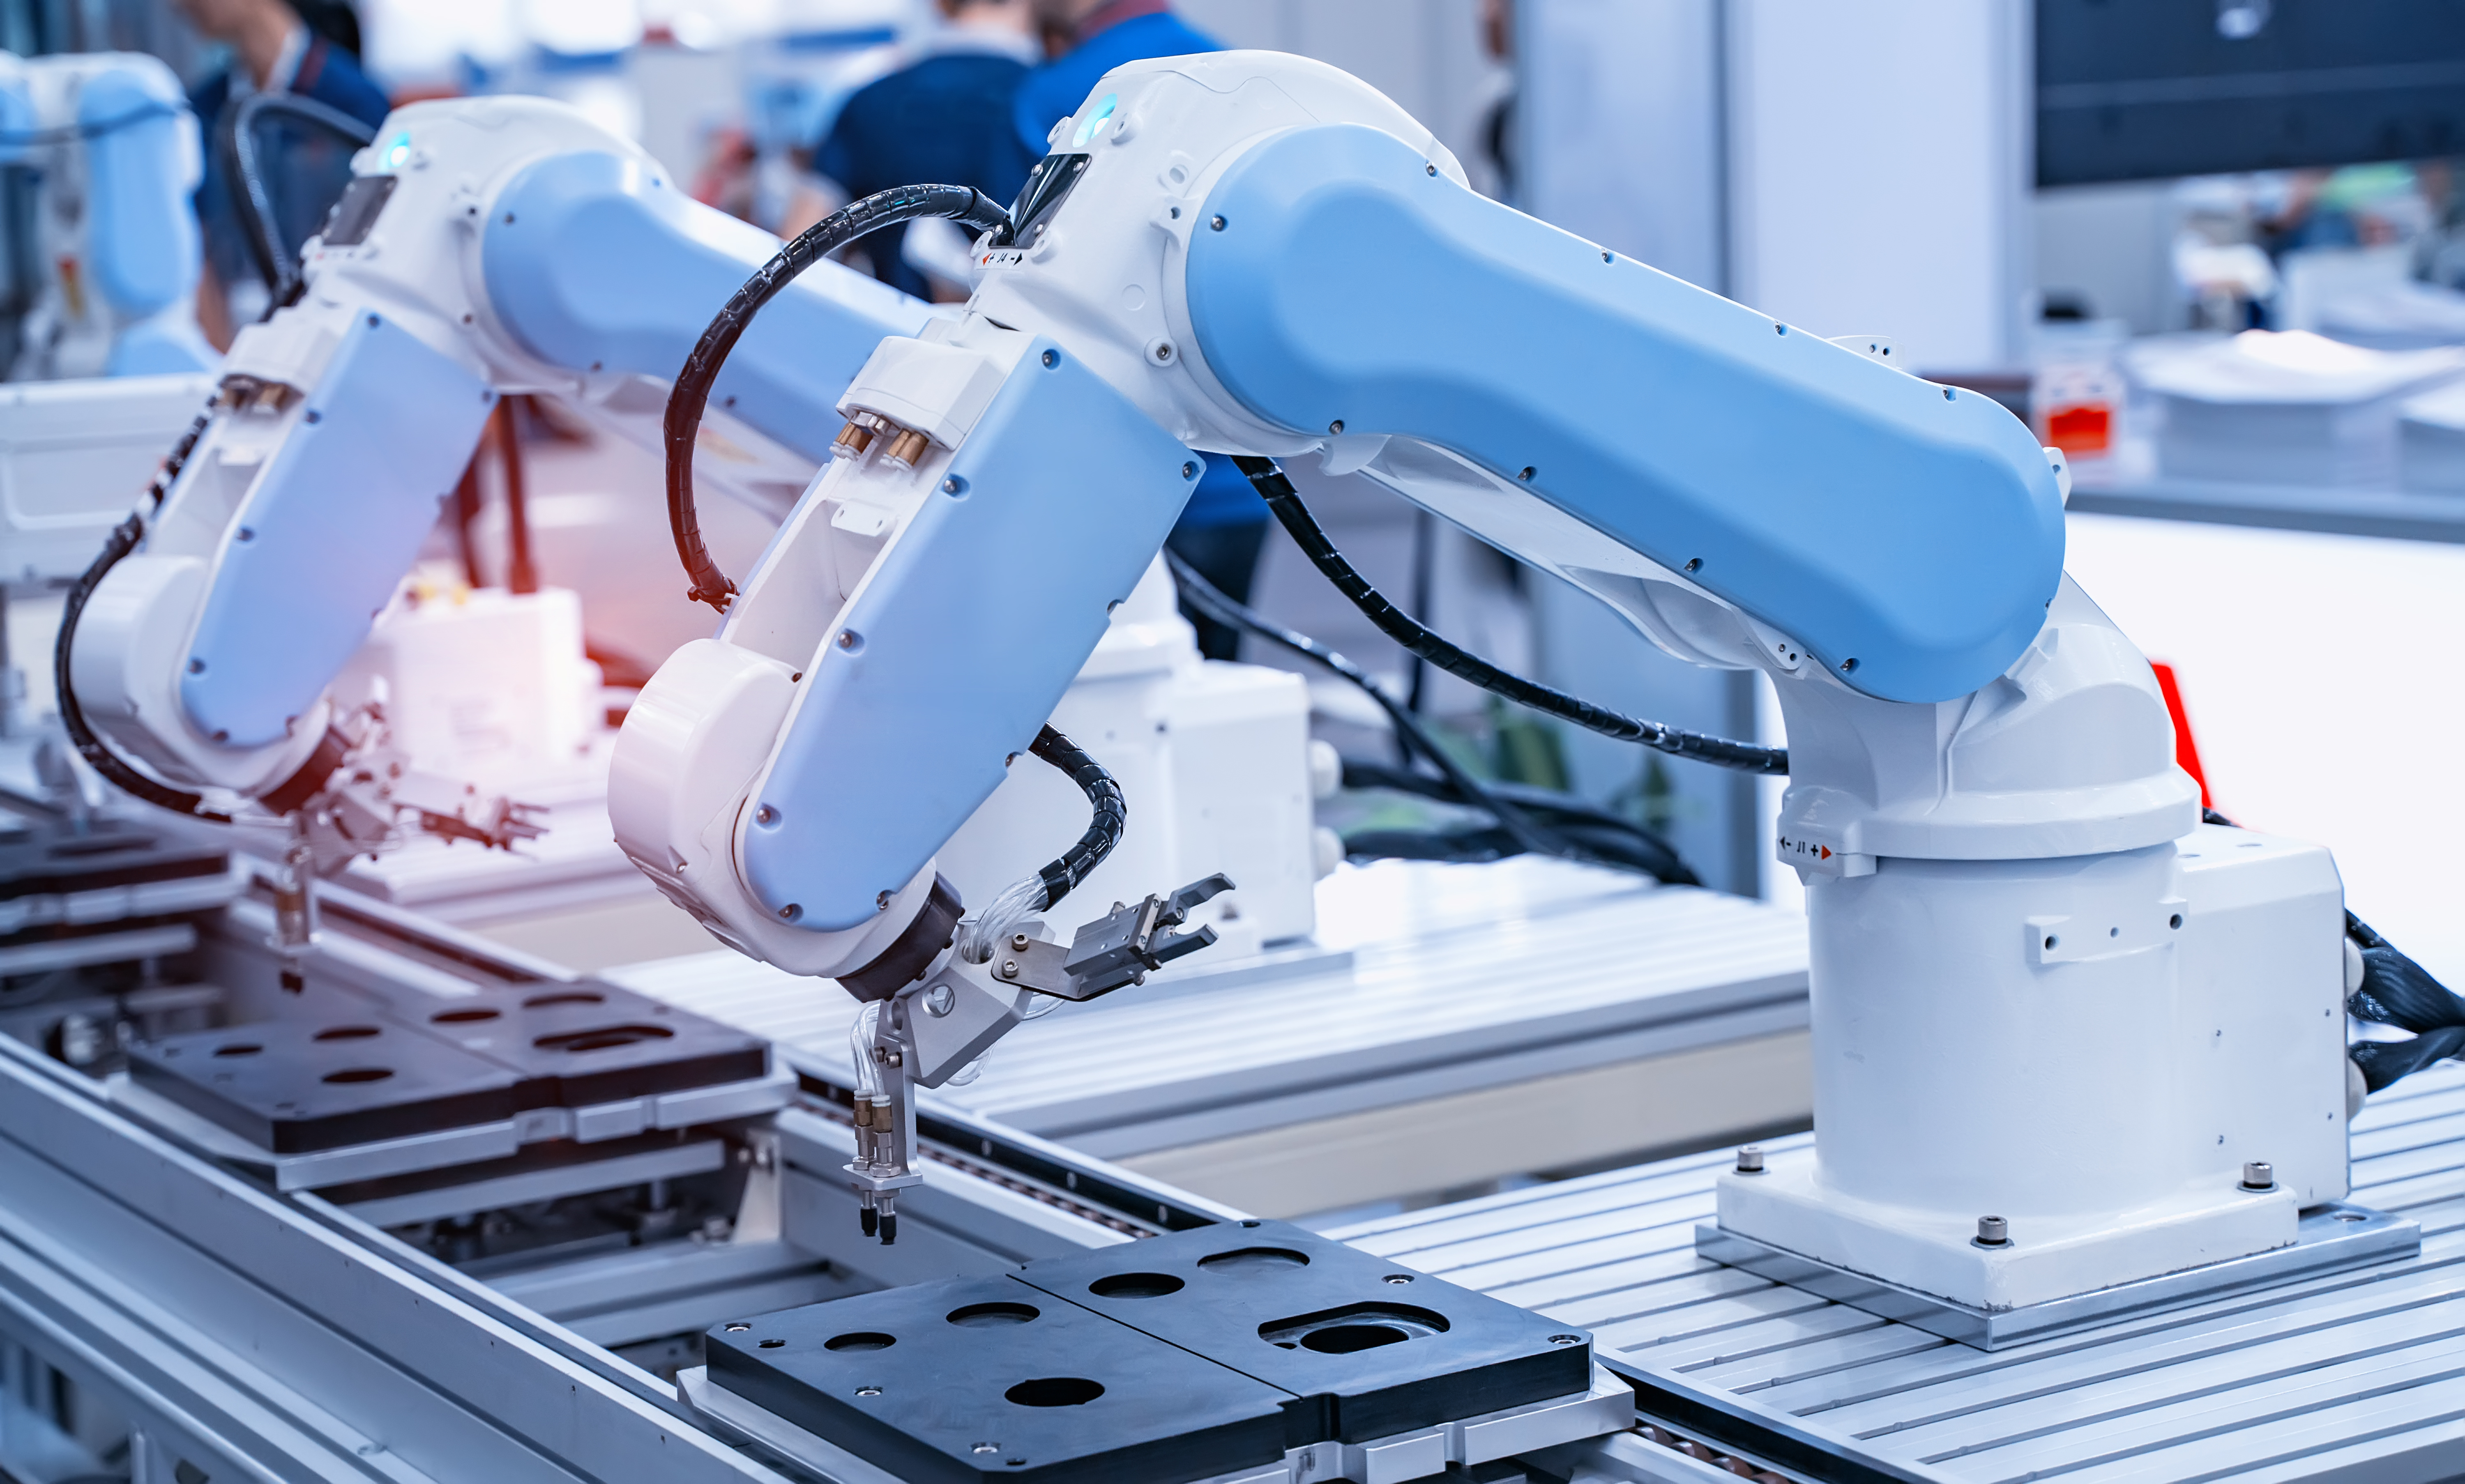 Portescap will be showcasing its high-performance motors and motion control accessories for robotic and automation applications at Automation Expo 2023 (Source: AdobeStock_287866501)